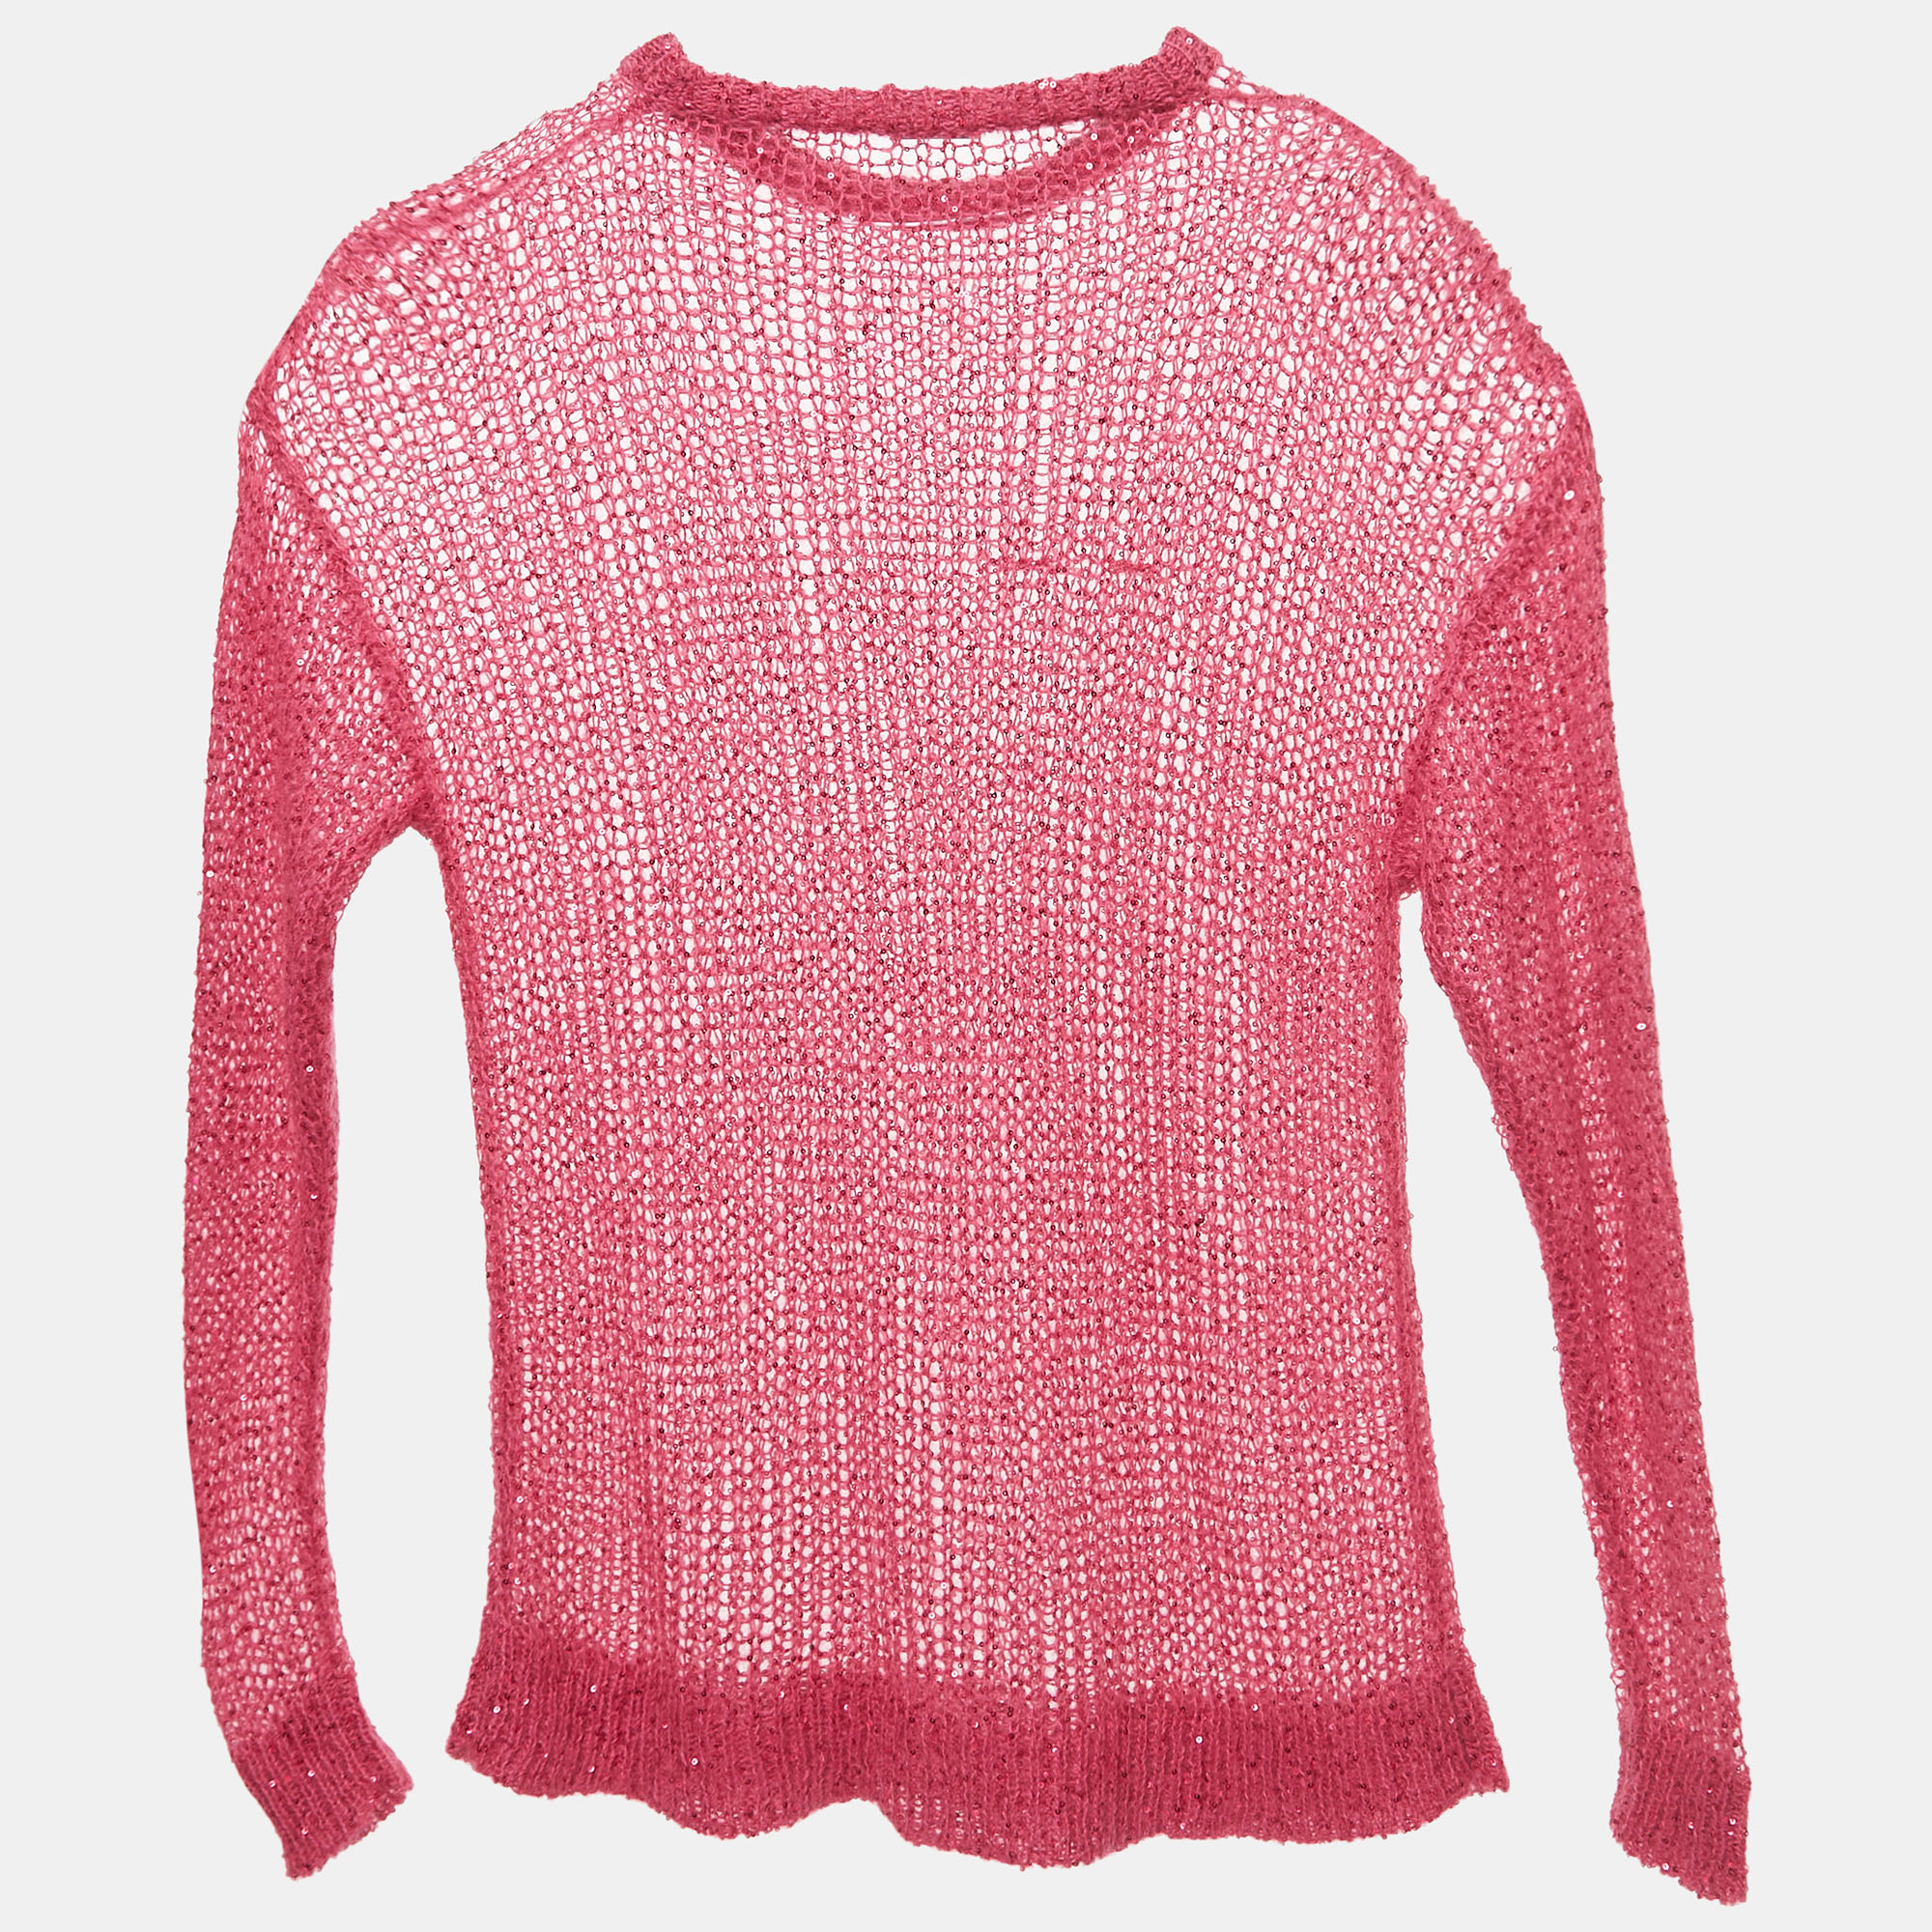 Pre-owned Miu Miu Pink Sequin Embellished Open Knit Sweater M